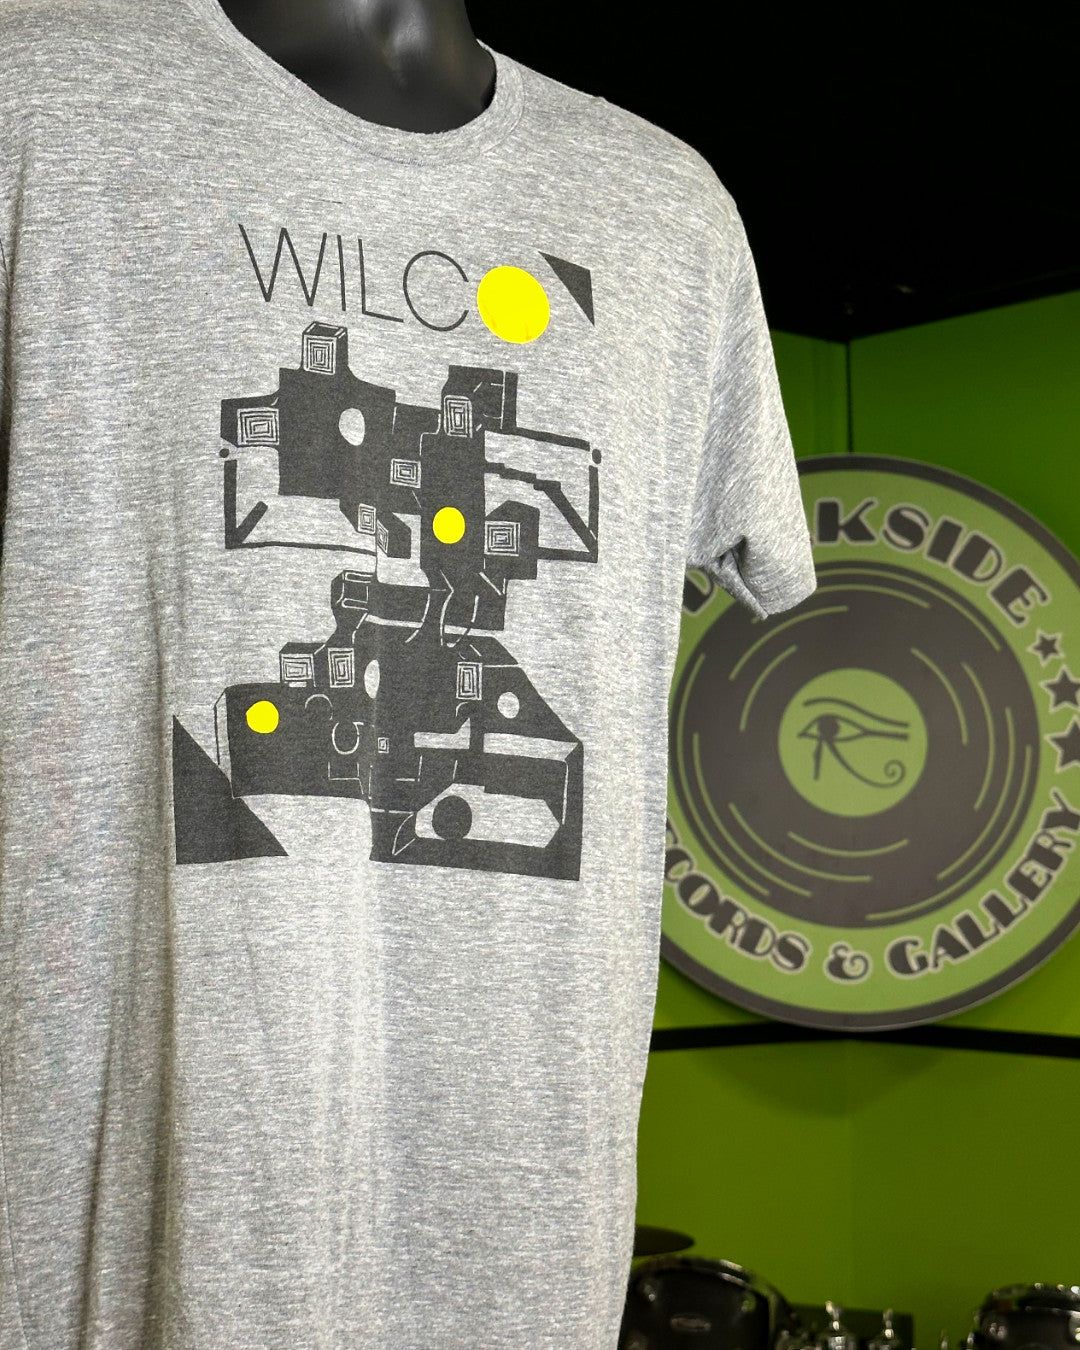 Wilco 2011 Tour T-Shirt, Grey, L - Darkside Records